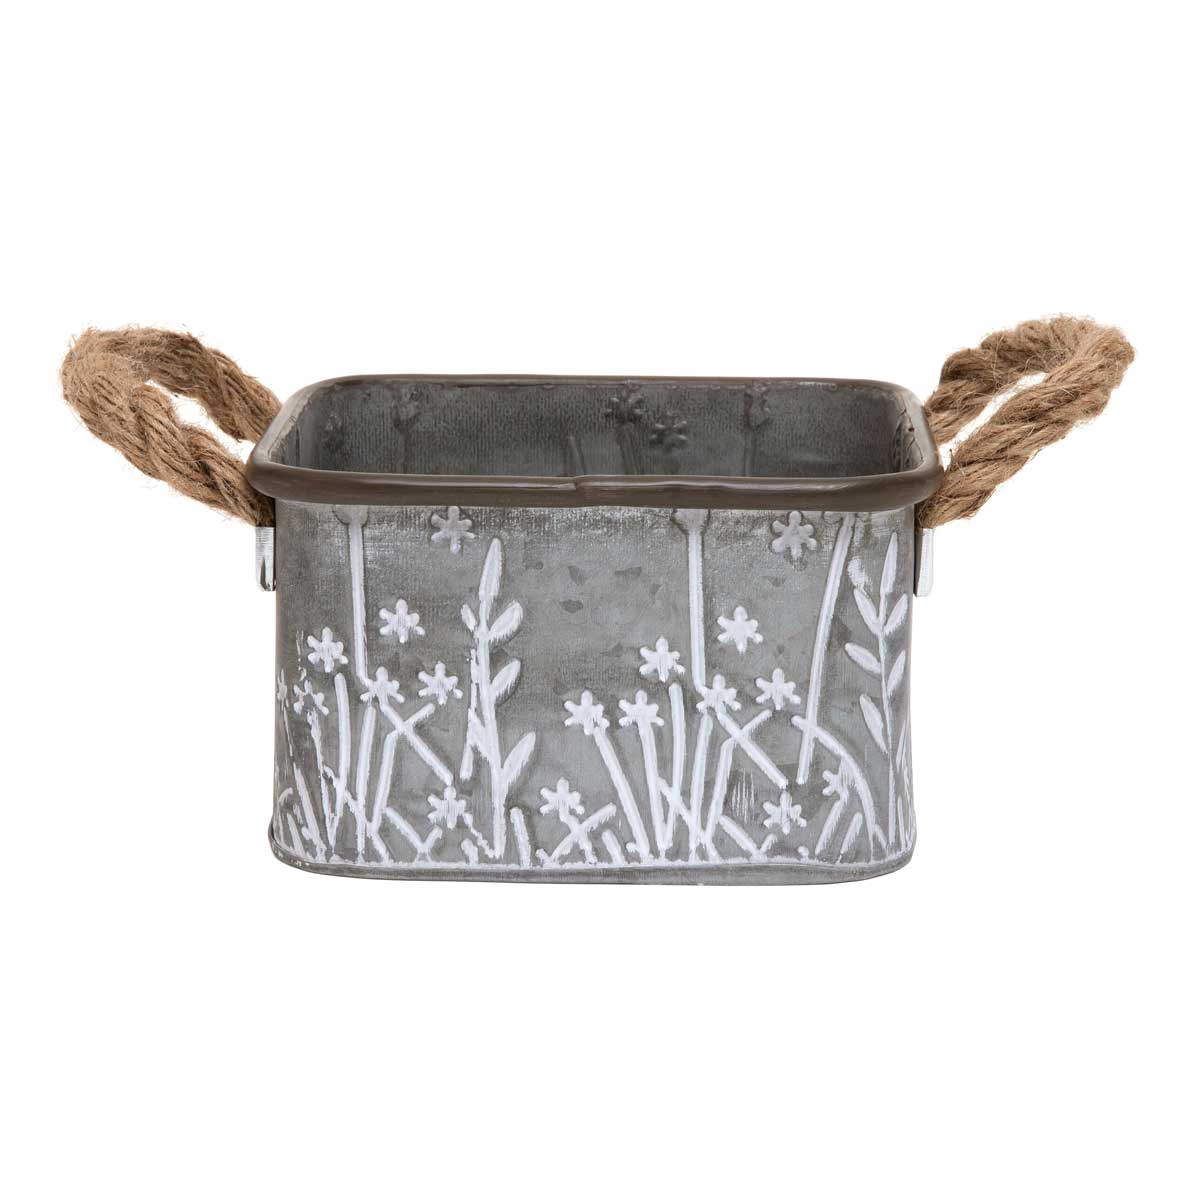 MEADOW MOTIF METAL PLANTER SQUARE WITH WHITE FLOWERS